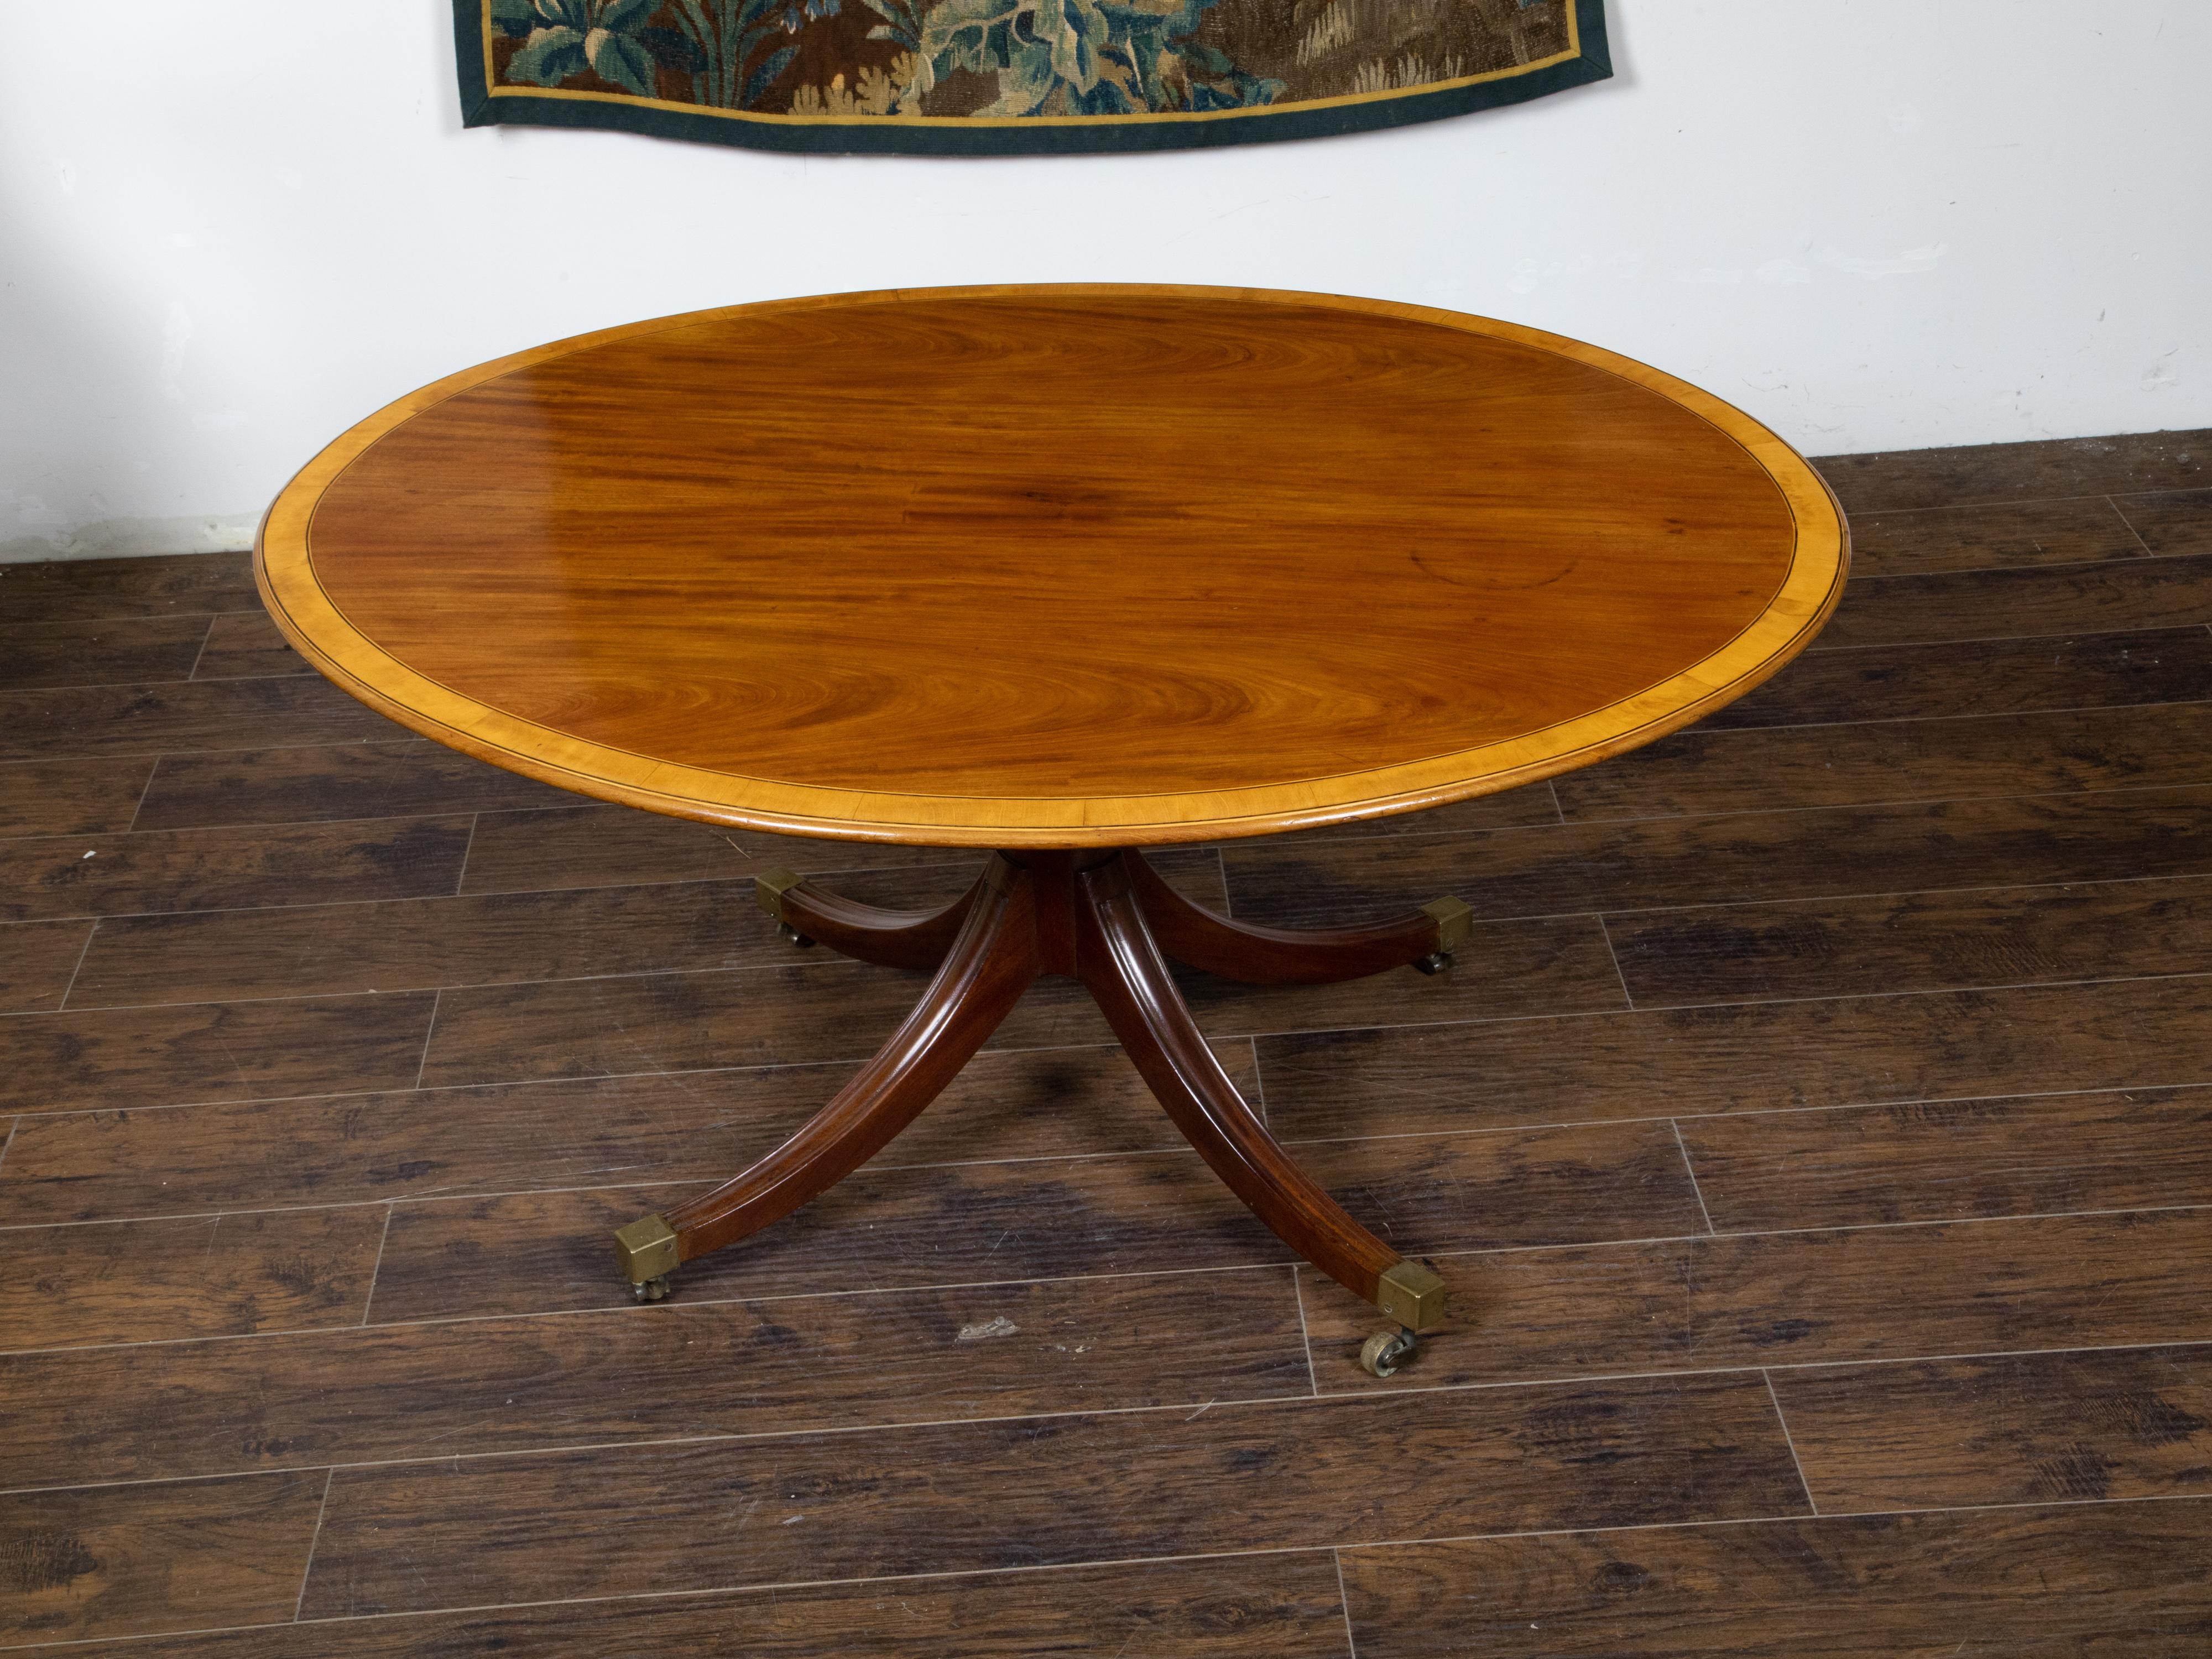 Brass English Mahogany 1840s Oval Top Pedestal Table with Quadripod Base and Casters For Sale